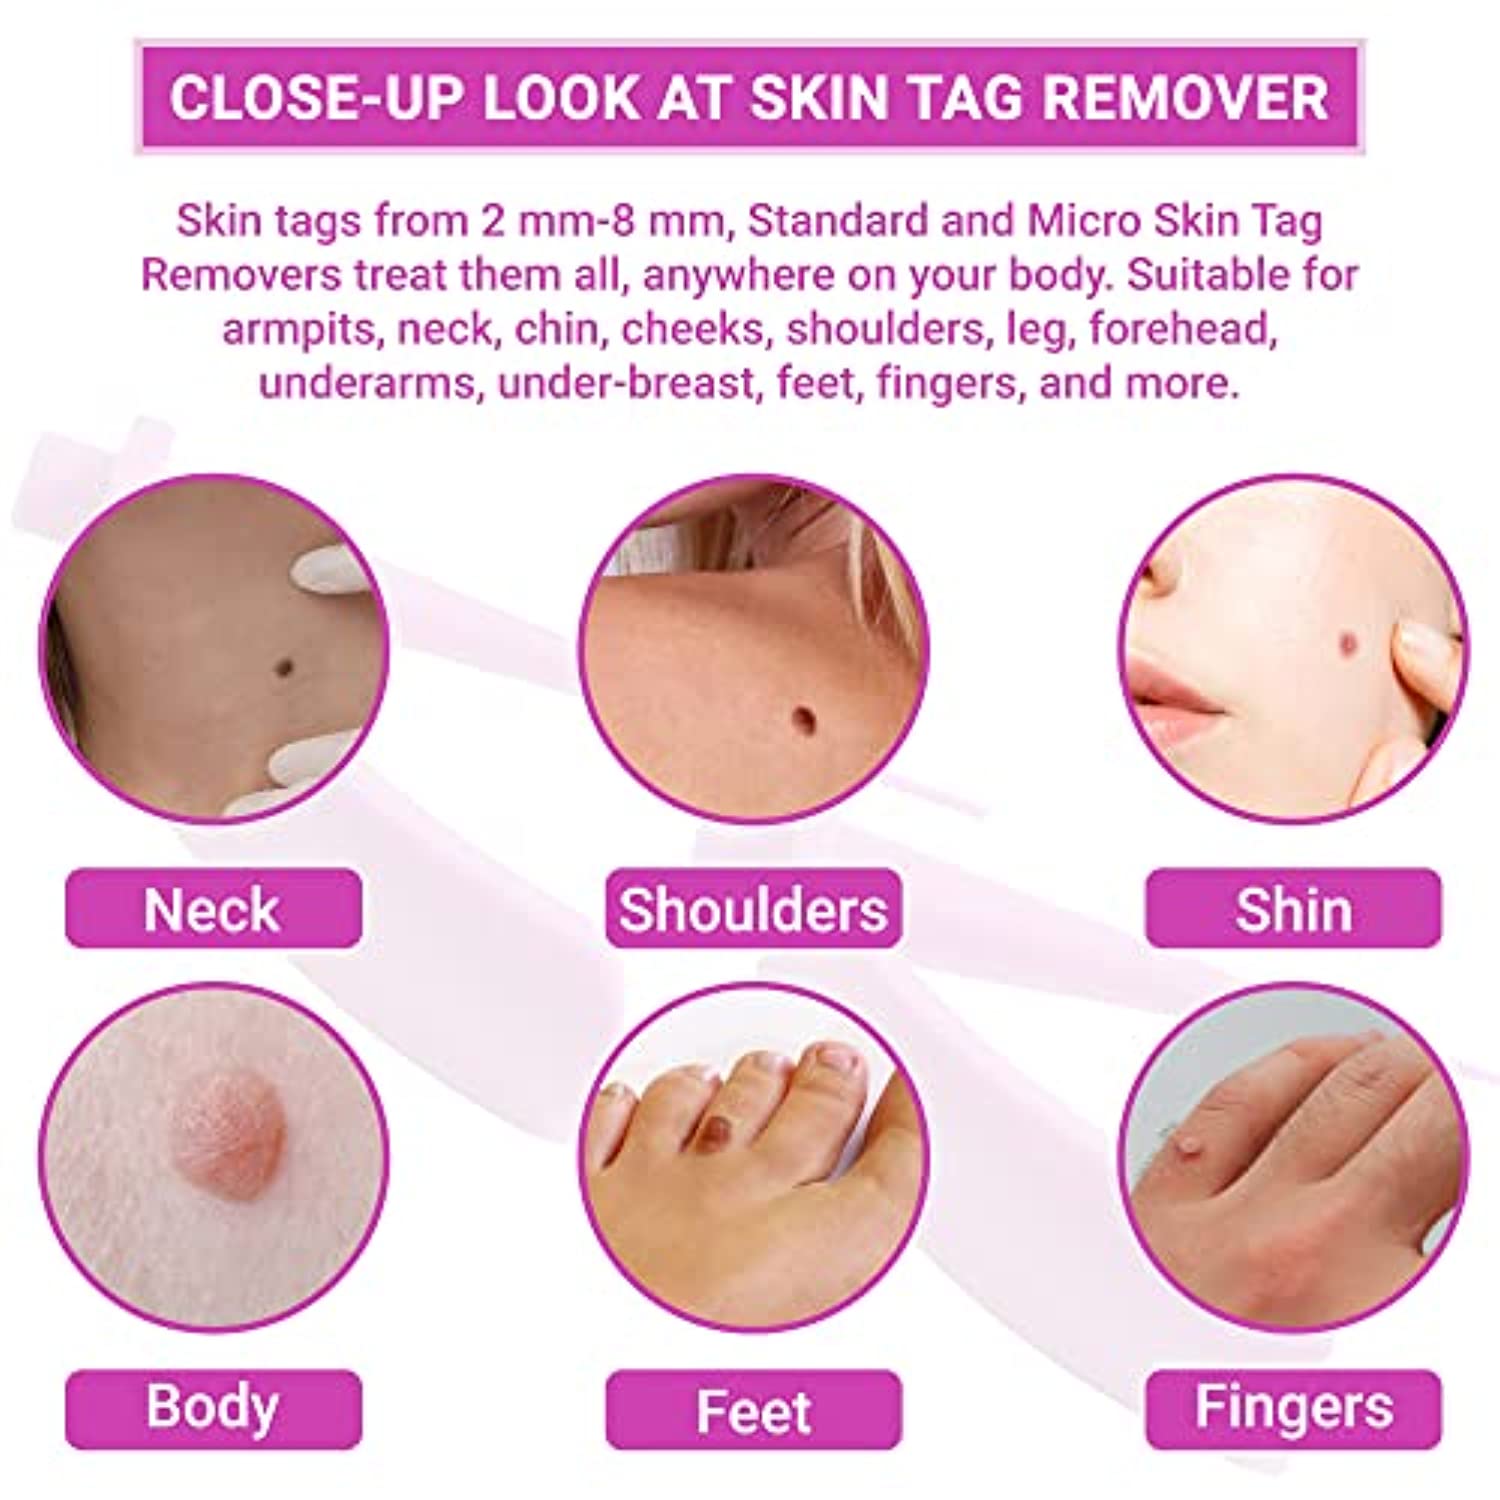 Skin Tag Removal Kit, Small & Standard Skin Tag Remover Device, 36 Pc Repair Patches, Skin Tag Remover Kit for Small and Large Skin Tags (2mm to 8 mm), for Body, Face, Neck, Finger, Arm, Easy, Safe